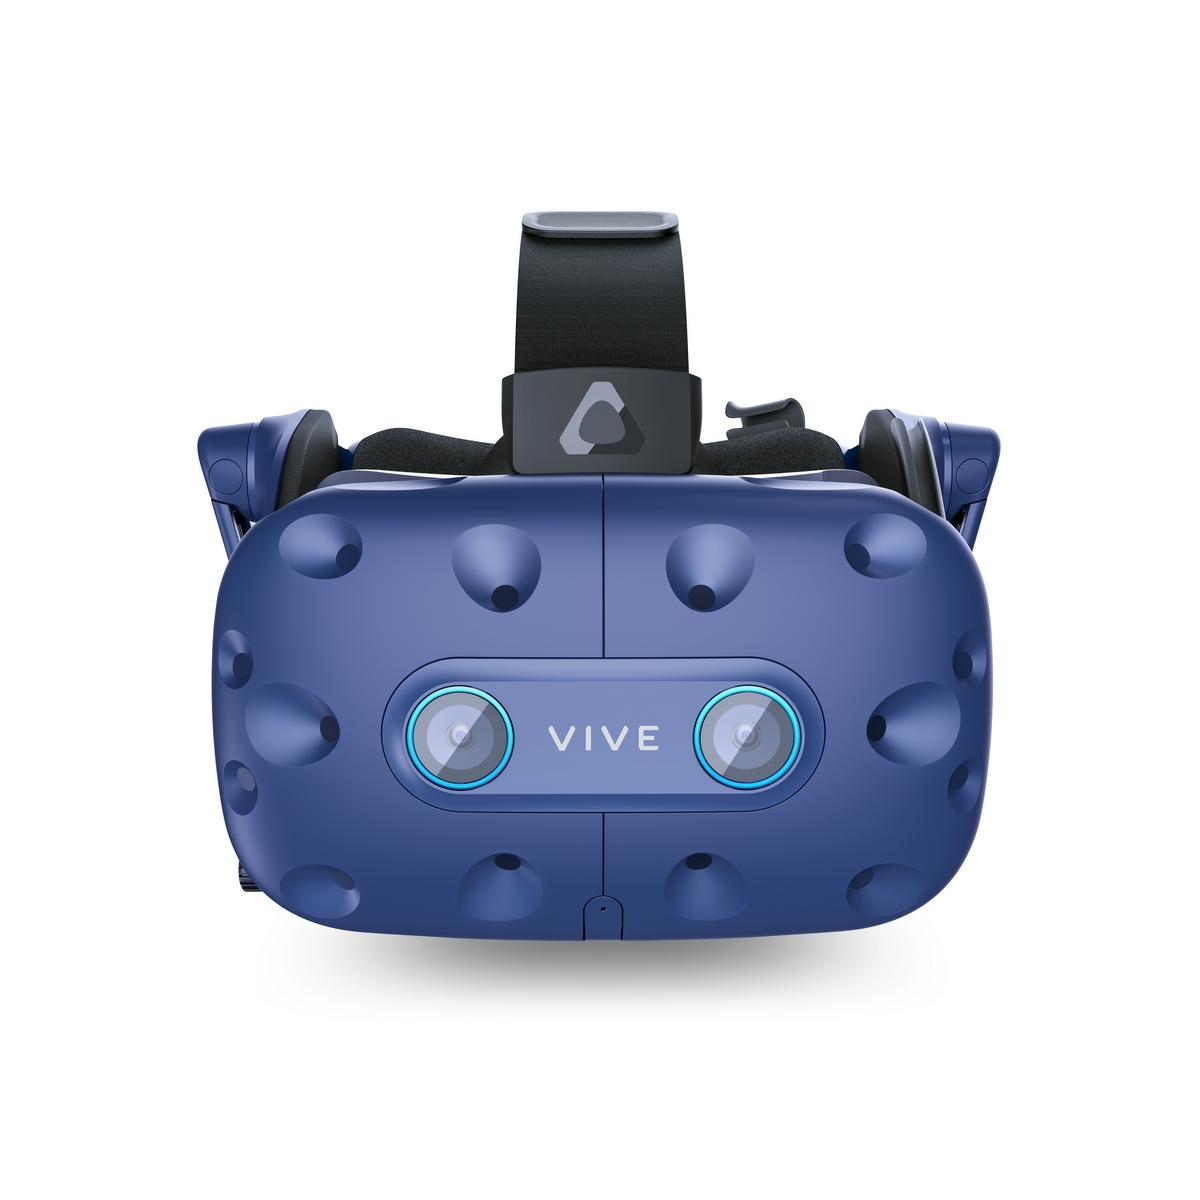 HTC - HTC VIVE PRO EYE Eye Tracking Room Scale VR Headset Bundle Including Contro